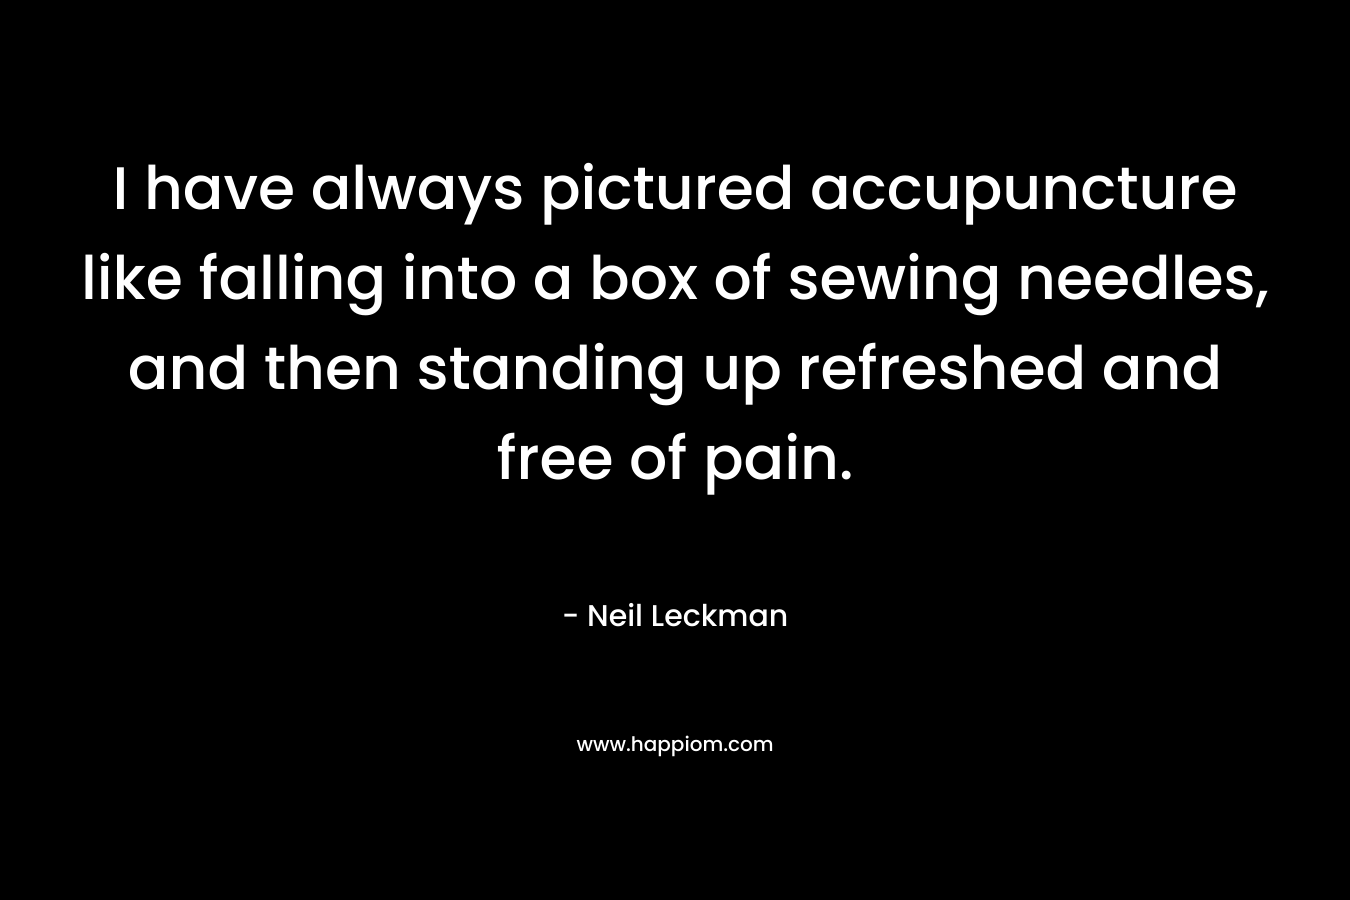 I have always pictured accupuncture like falling into a box of sewing needles, and then standing up refreshed and free of pain. – Neil Leckman